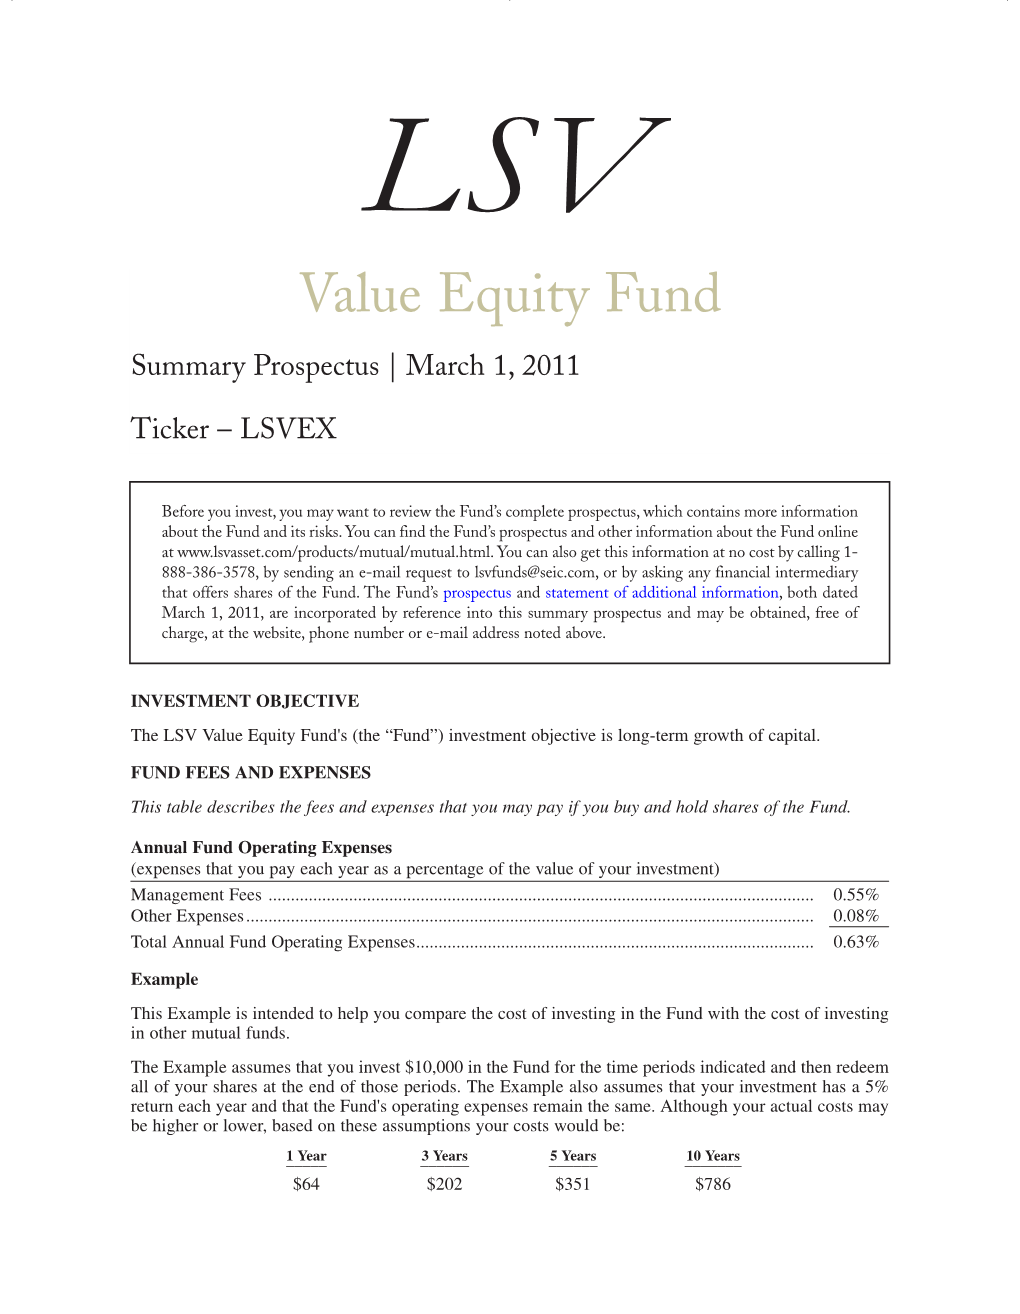 Value Equity Fund Summary Prospectus | March 1, 2011